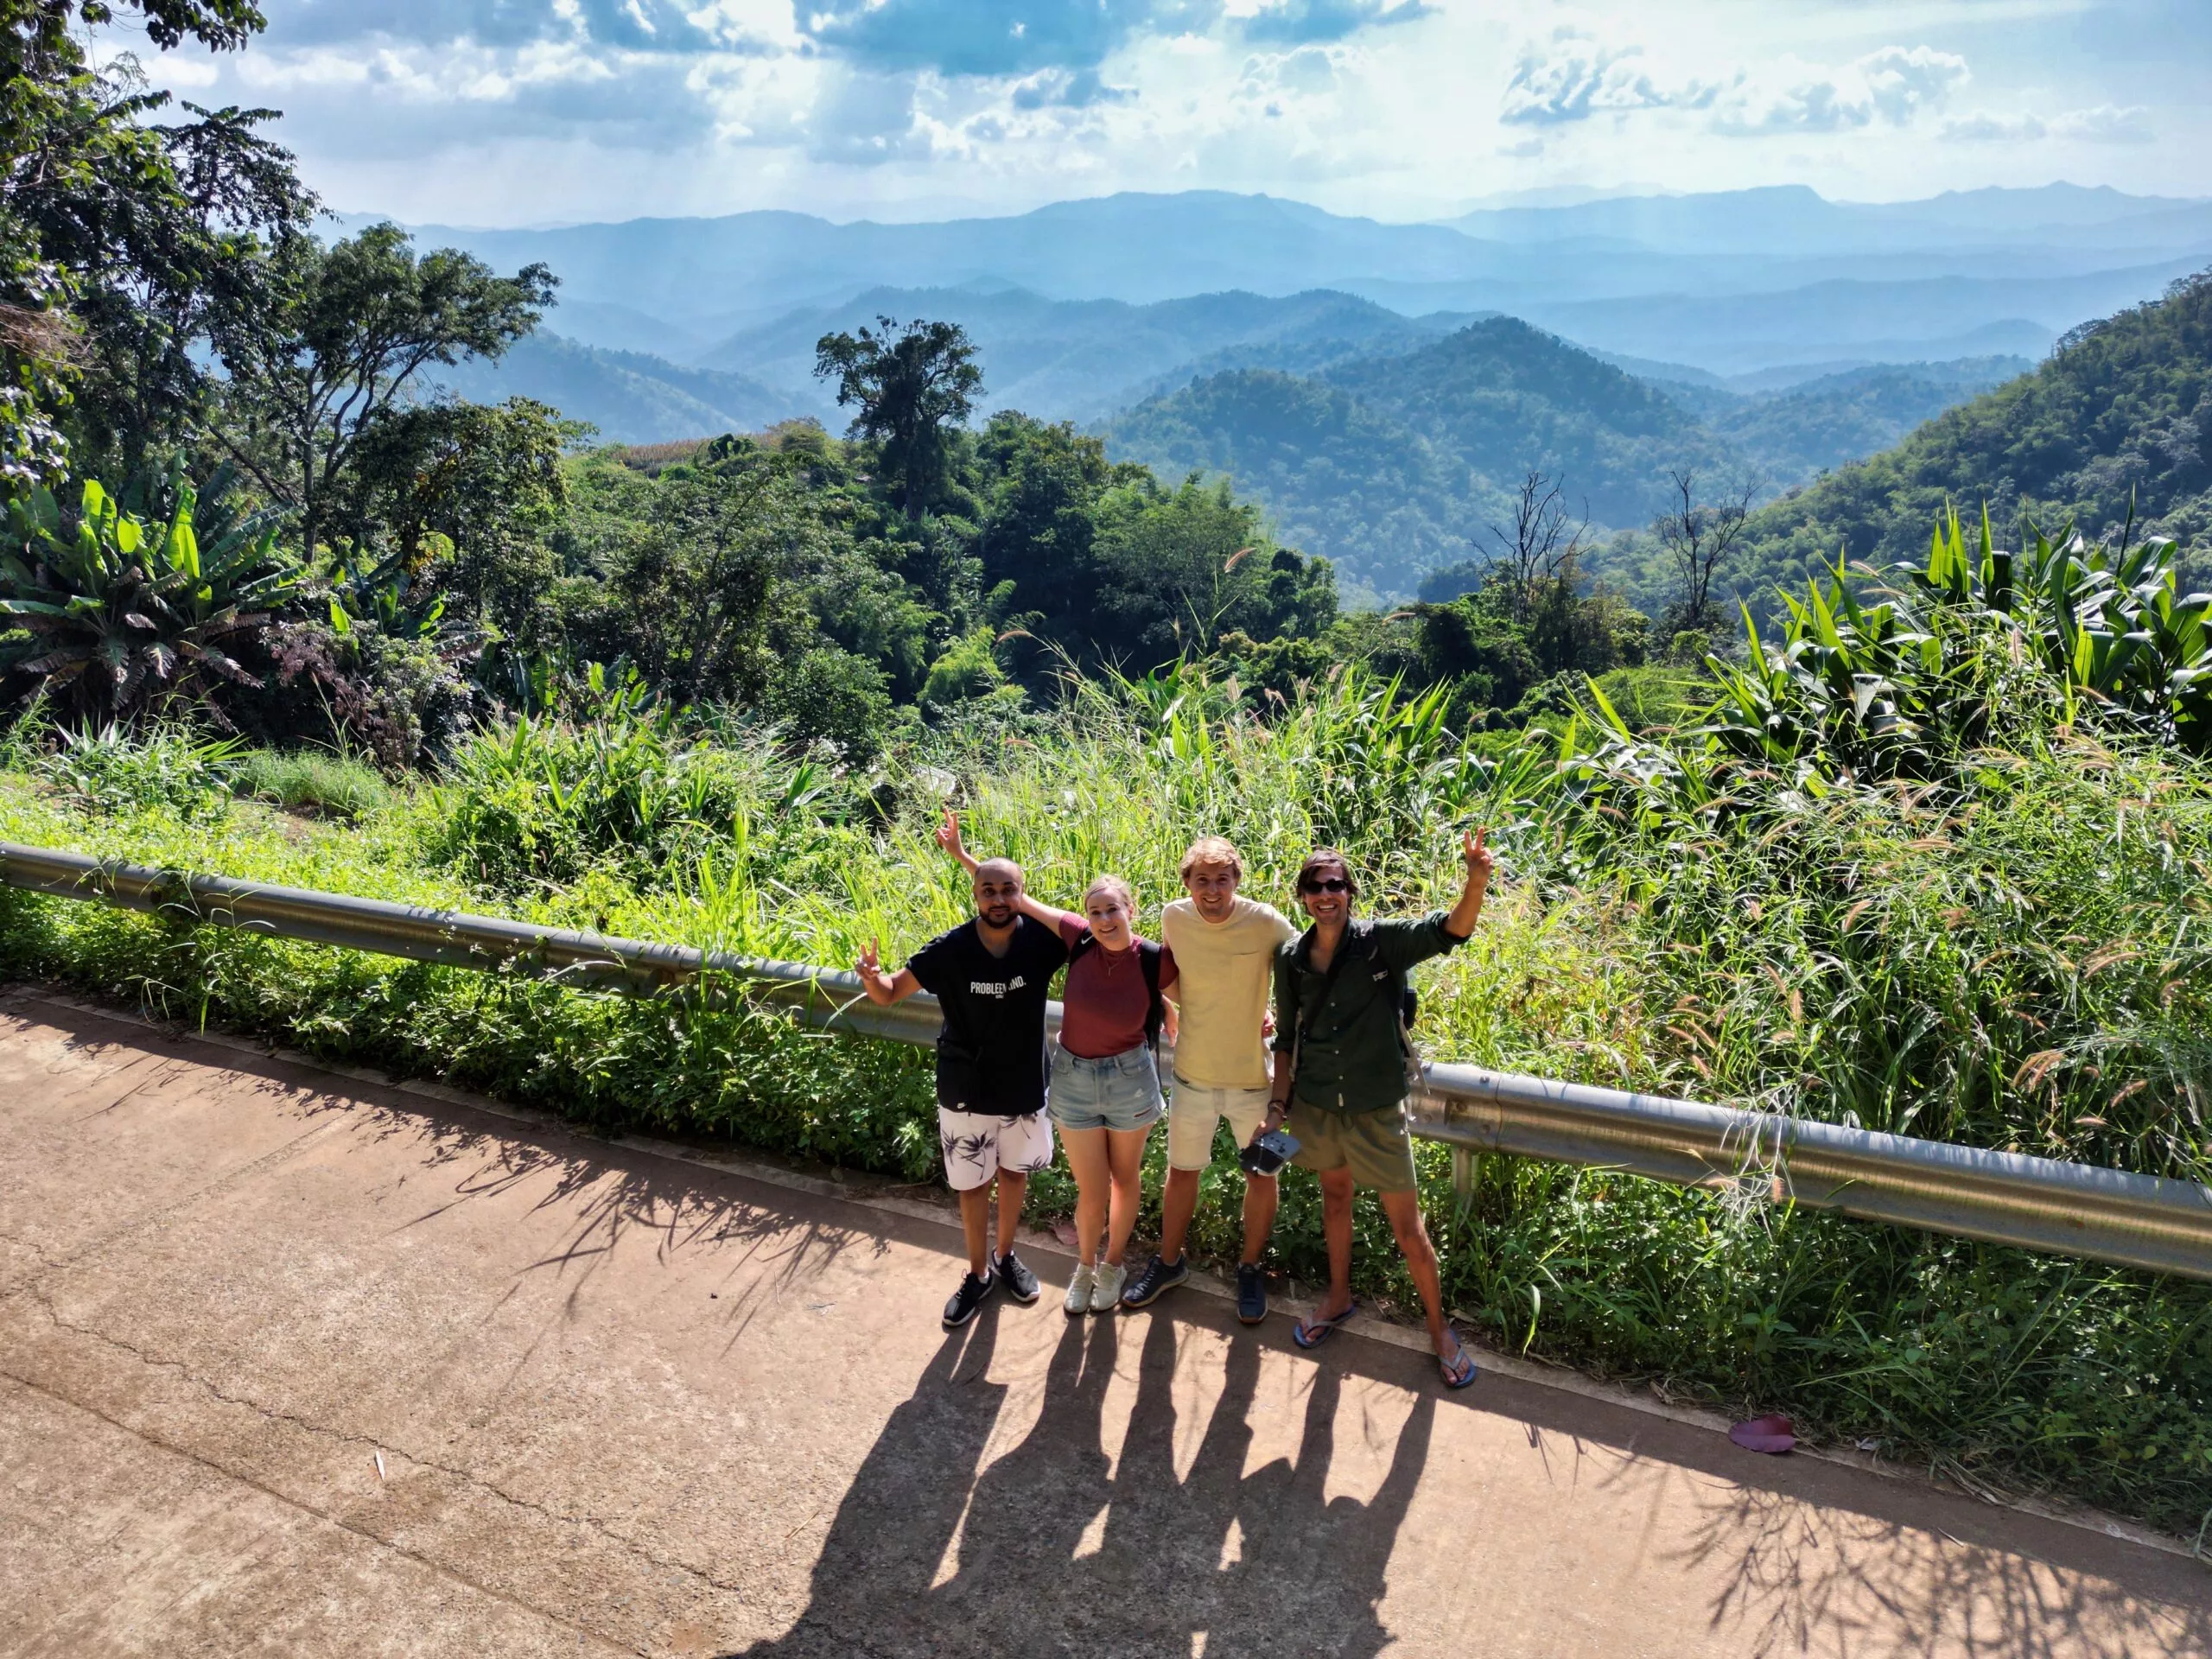 Group of friends with mountain landscape in the background, in Thailand